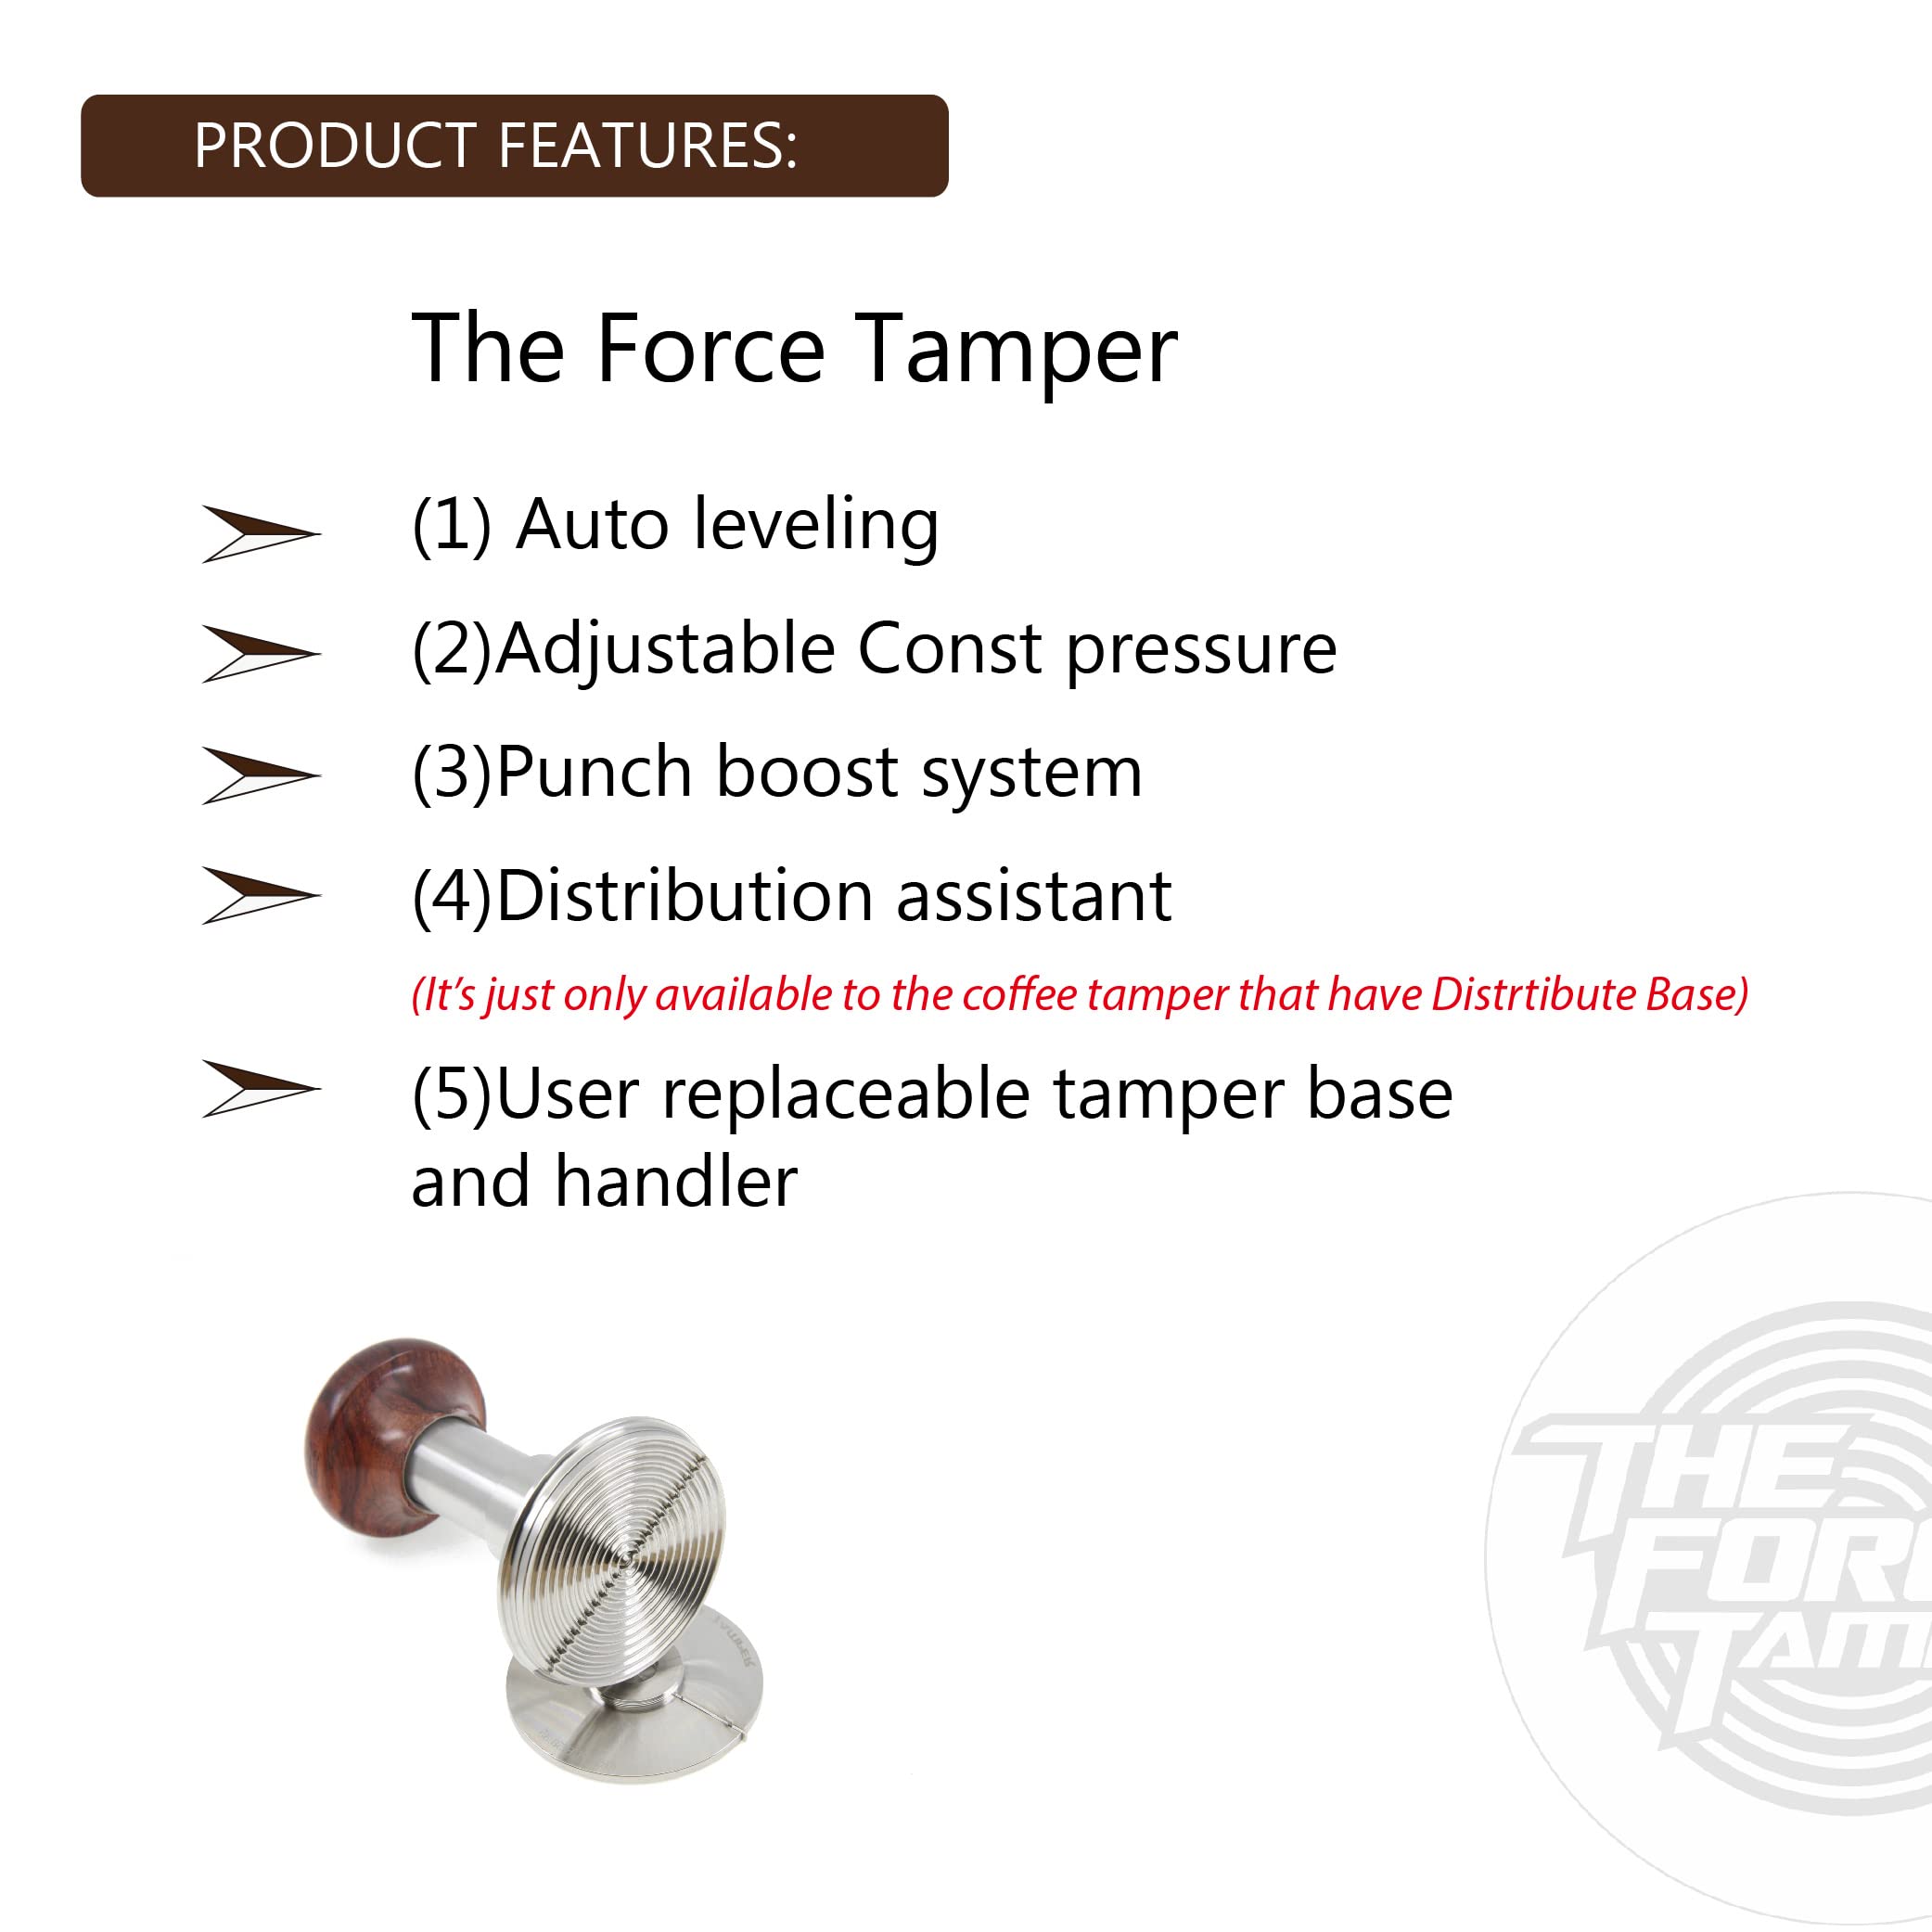 The Force Tamper - Automatic Impact Coffee Tamper Adjustable Const Pressure and Autoleveling Duo-Distribute Set (Jelly, 58.50mm)